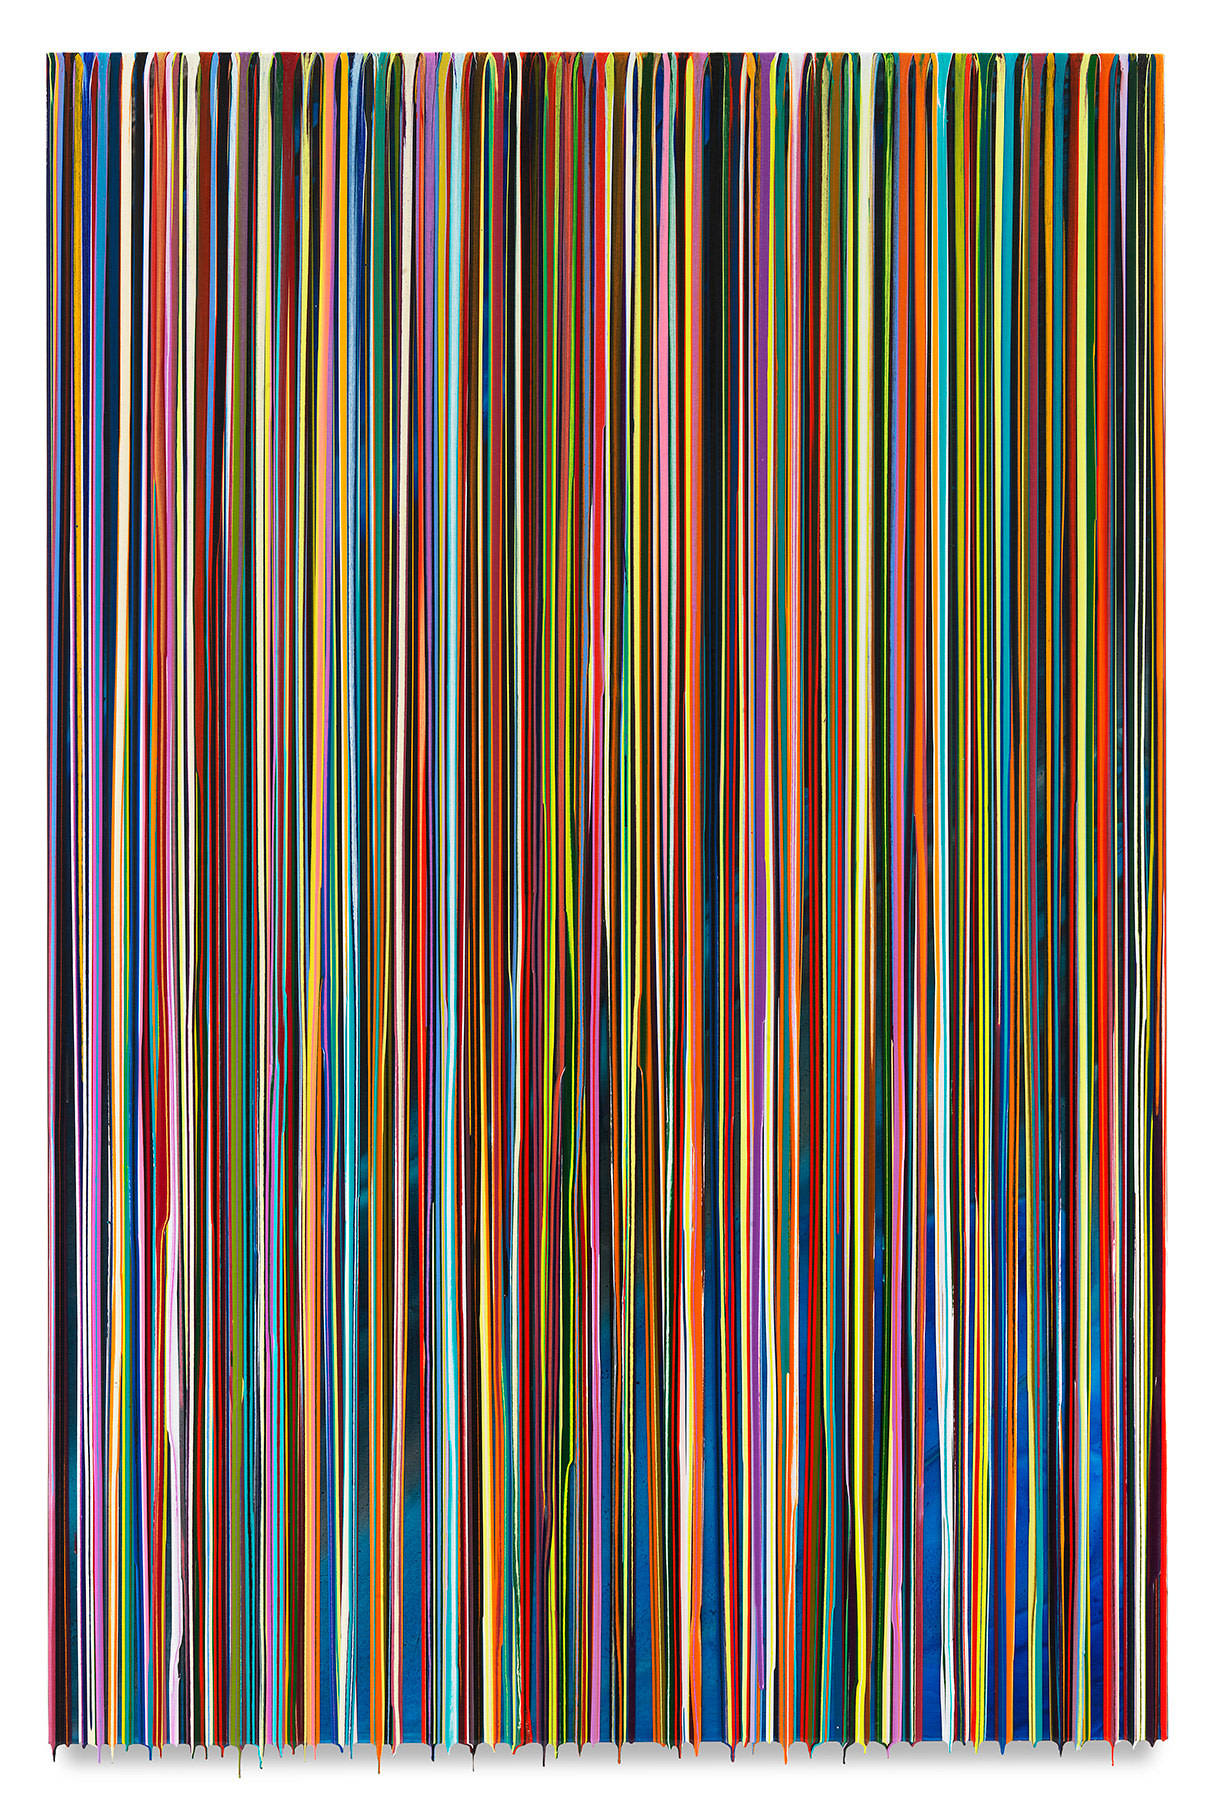 DIETAUBEAUFDEMDACH, 2016, Epoxy resin and pigments on wood, 90 x 60 inches, 228.6 x 152.4 cm, AMY#28454